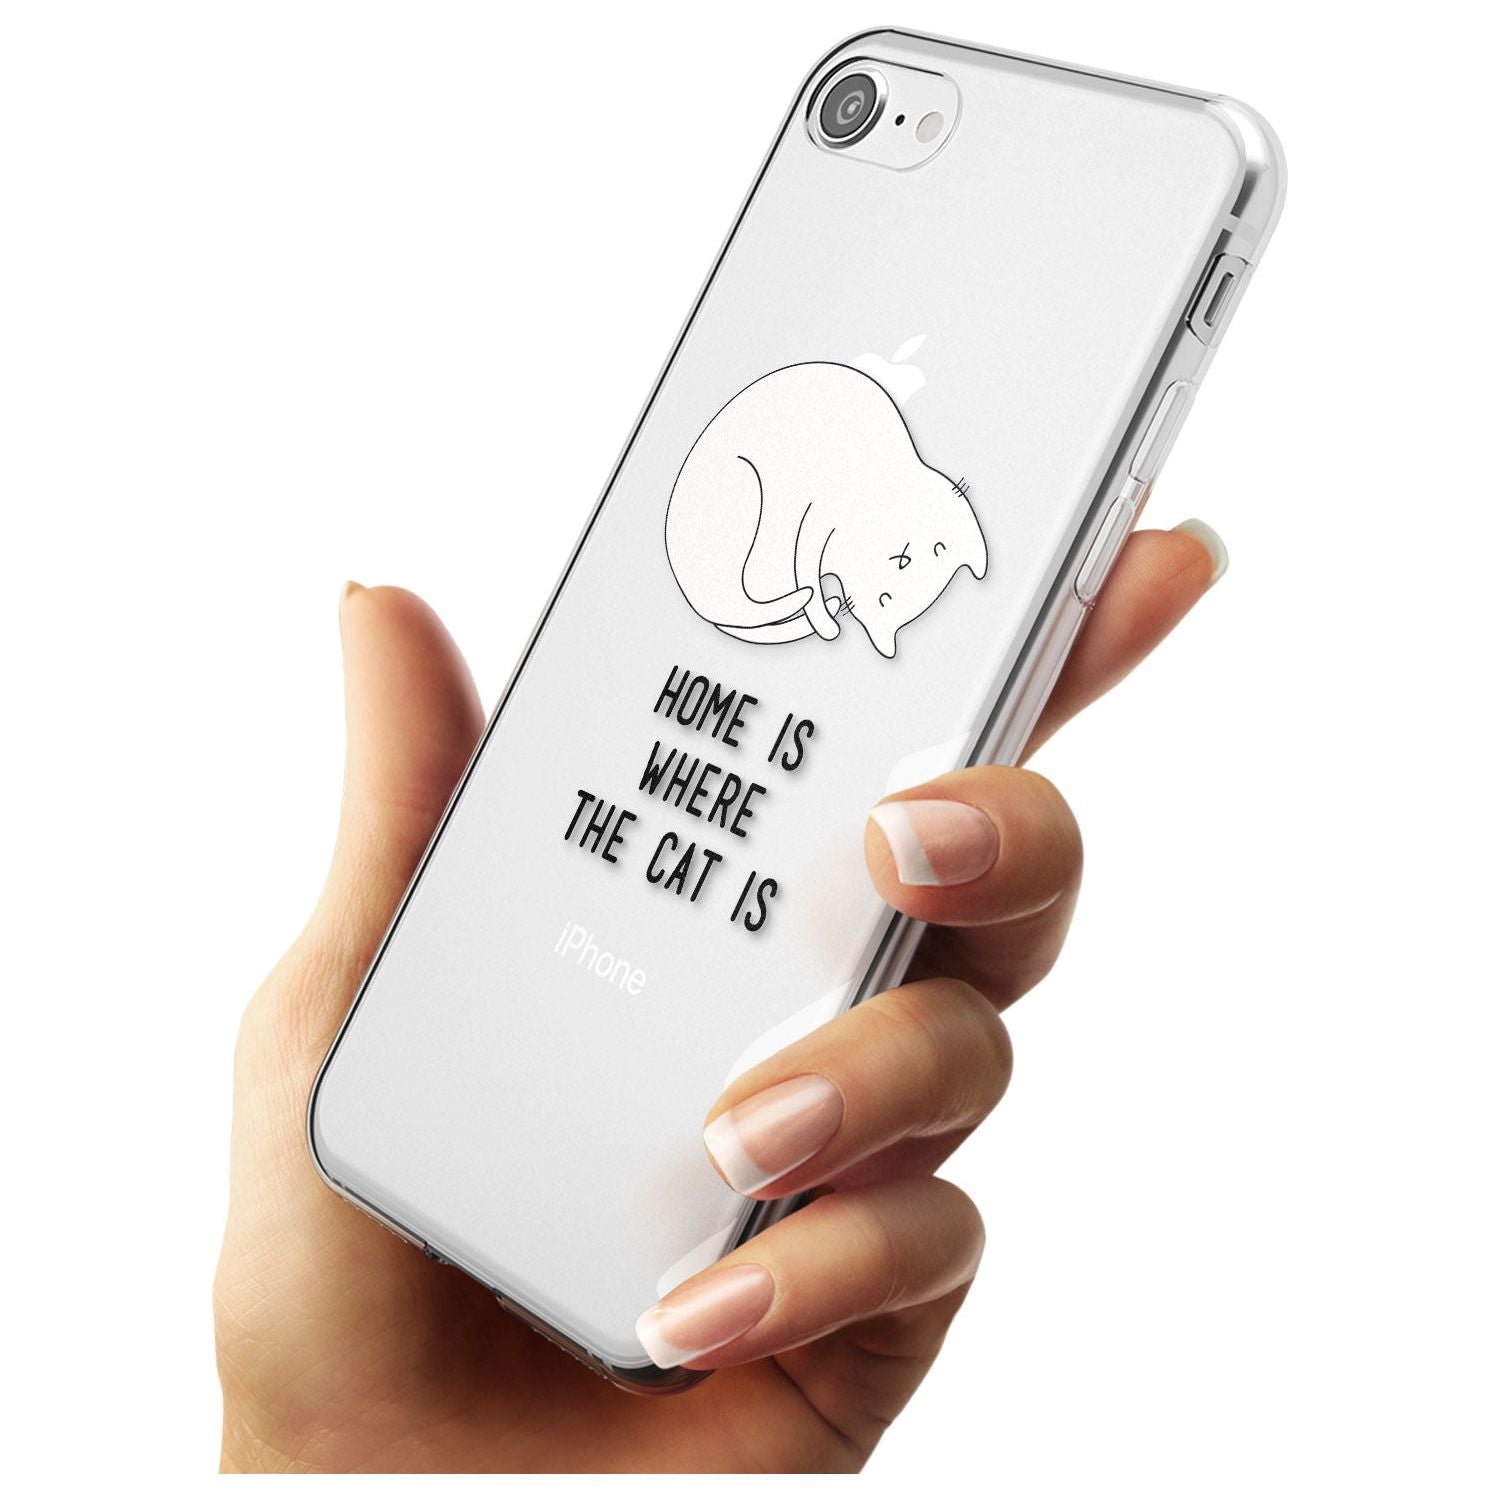 Home Is Where the Cat is Black Impact Phone Case for iPhone SE 8 7 Plus